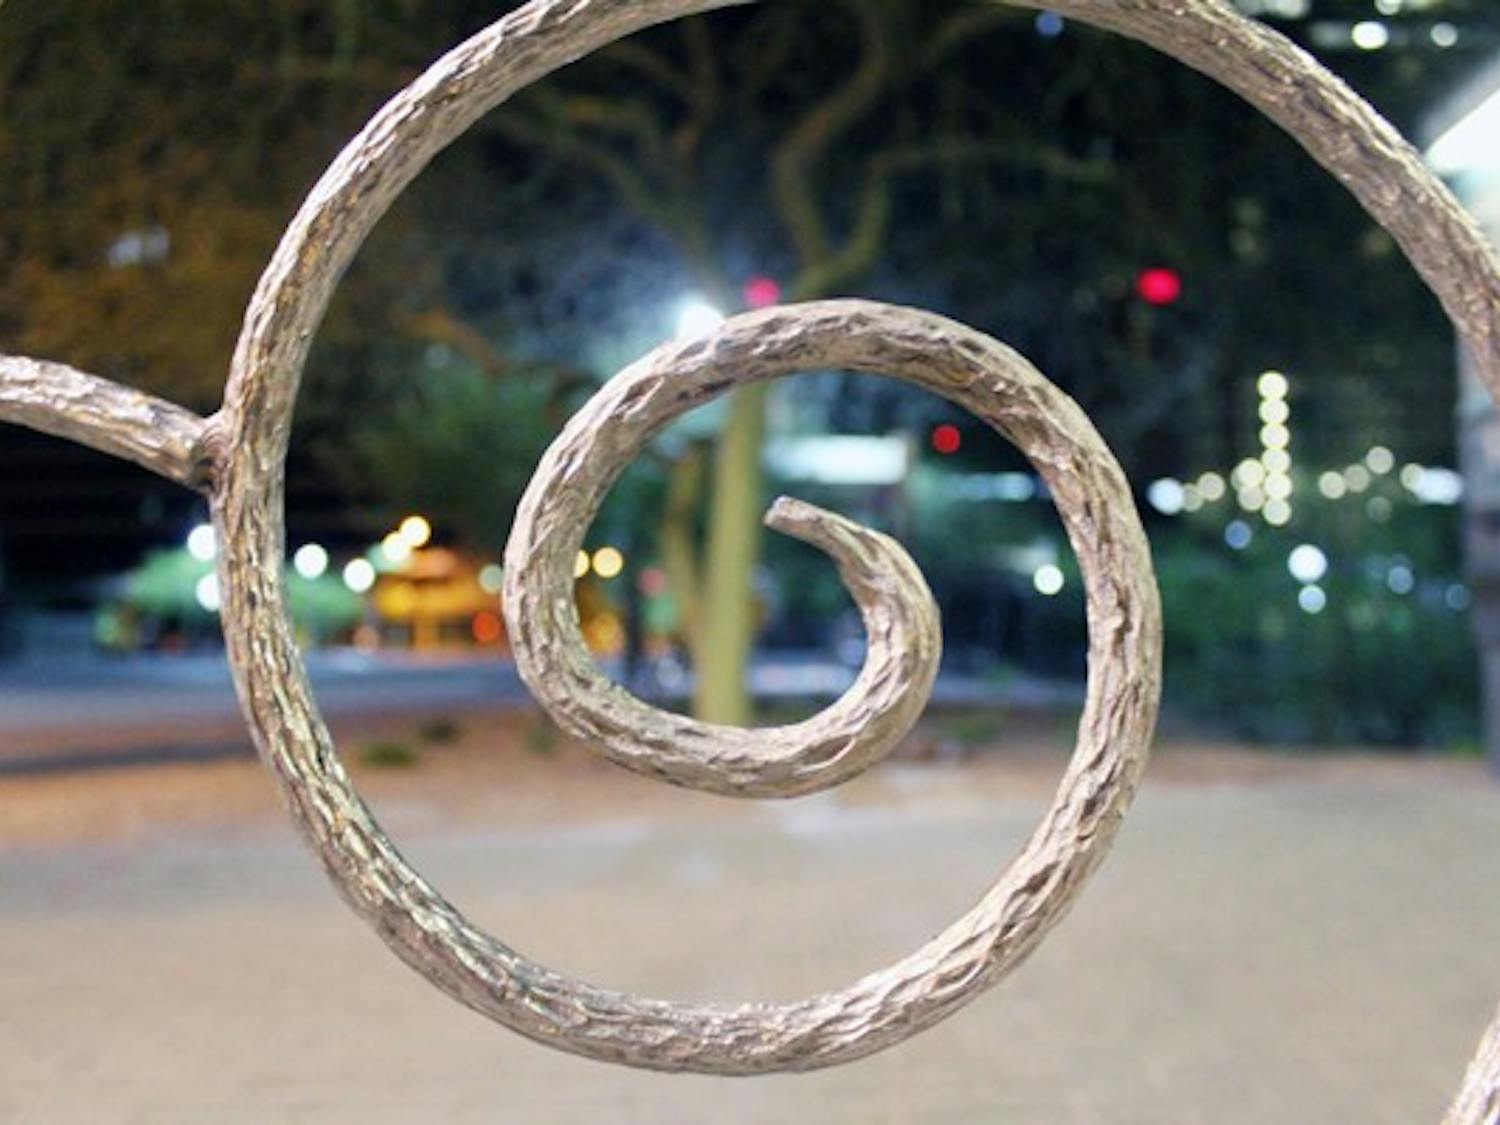 A spiral railing adorns a Valley Metro Light Rail station in downtown Phoenix. (Photo by Marissa Krings)